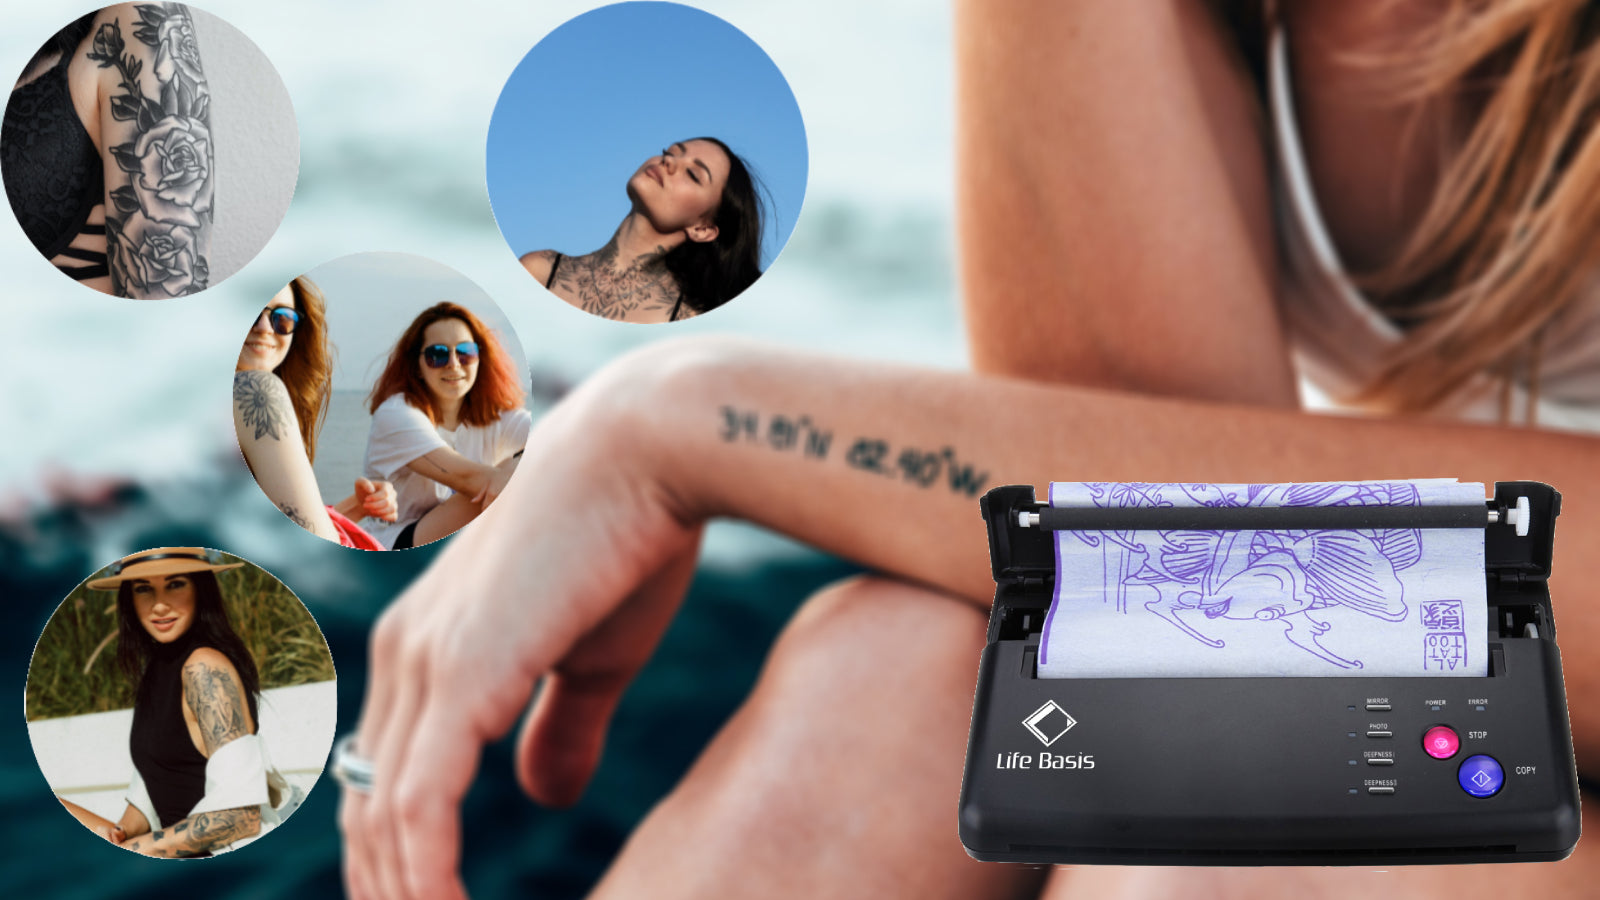 Get Perfectly Accurate Tattoos Every Time with Thermal Tattoo Stencil –  LifeBasis